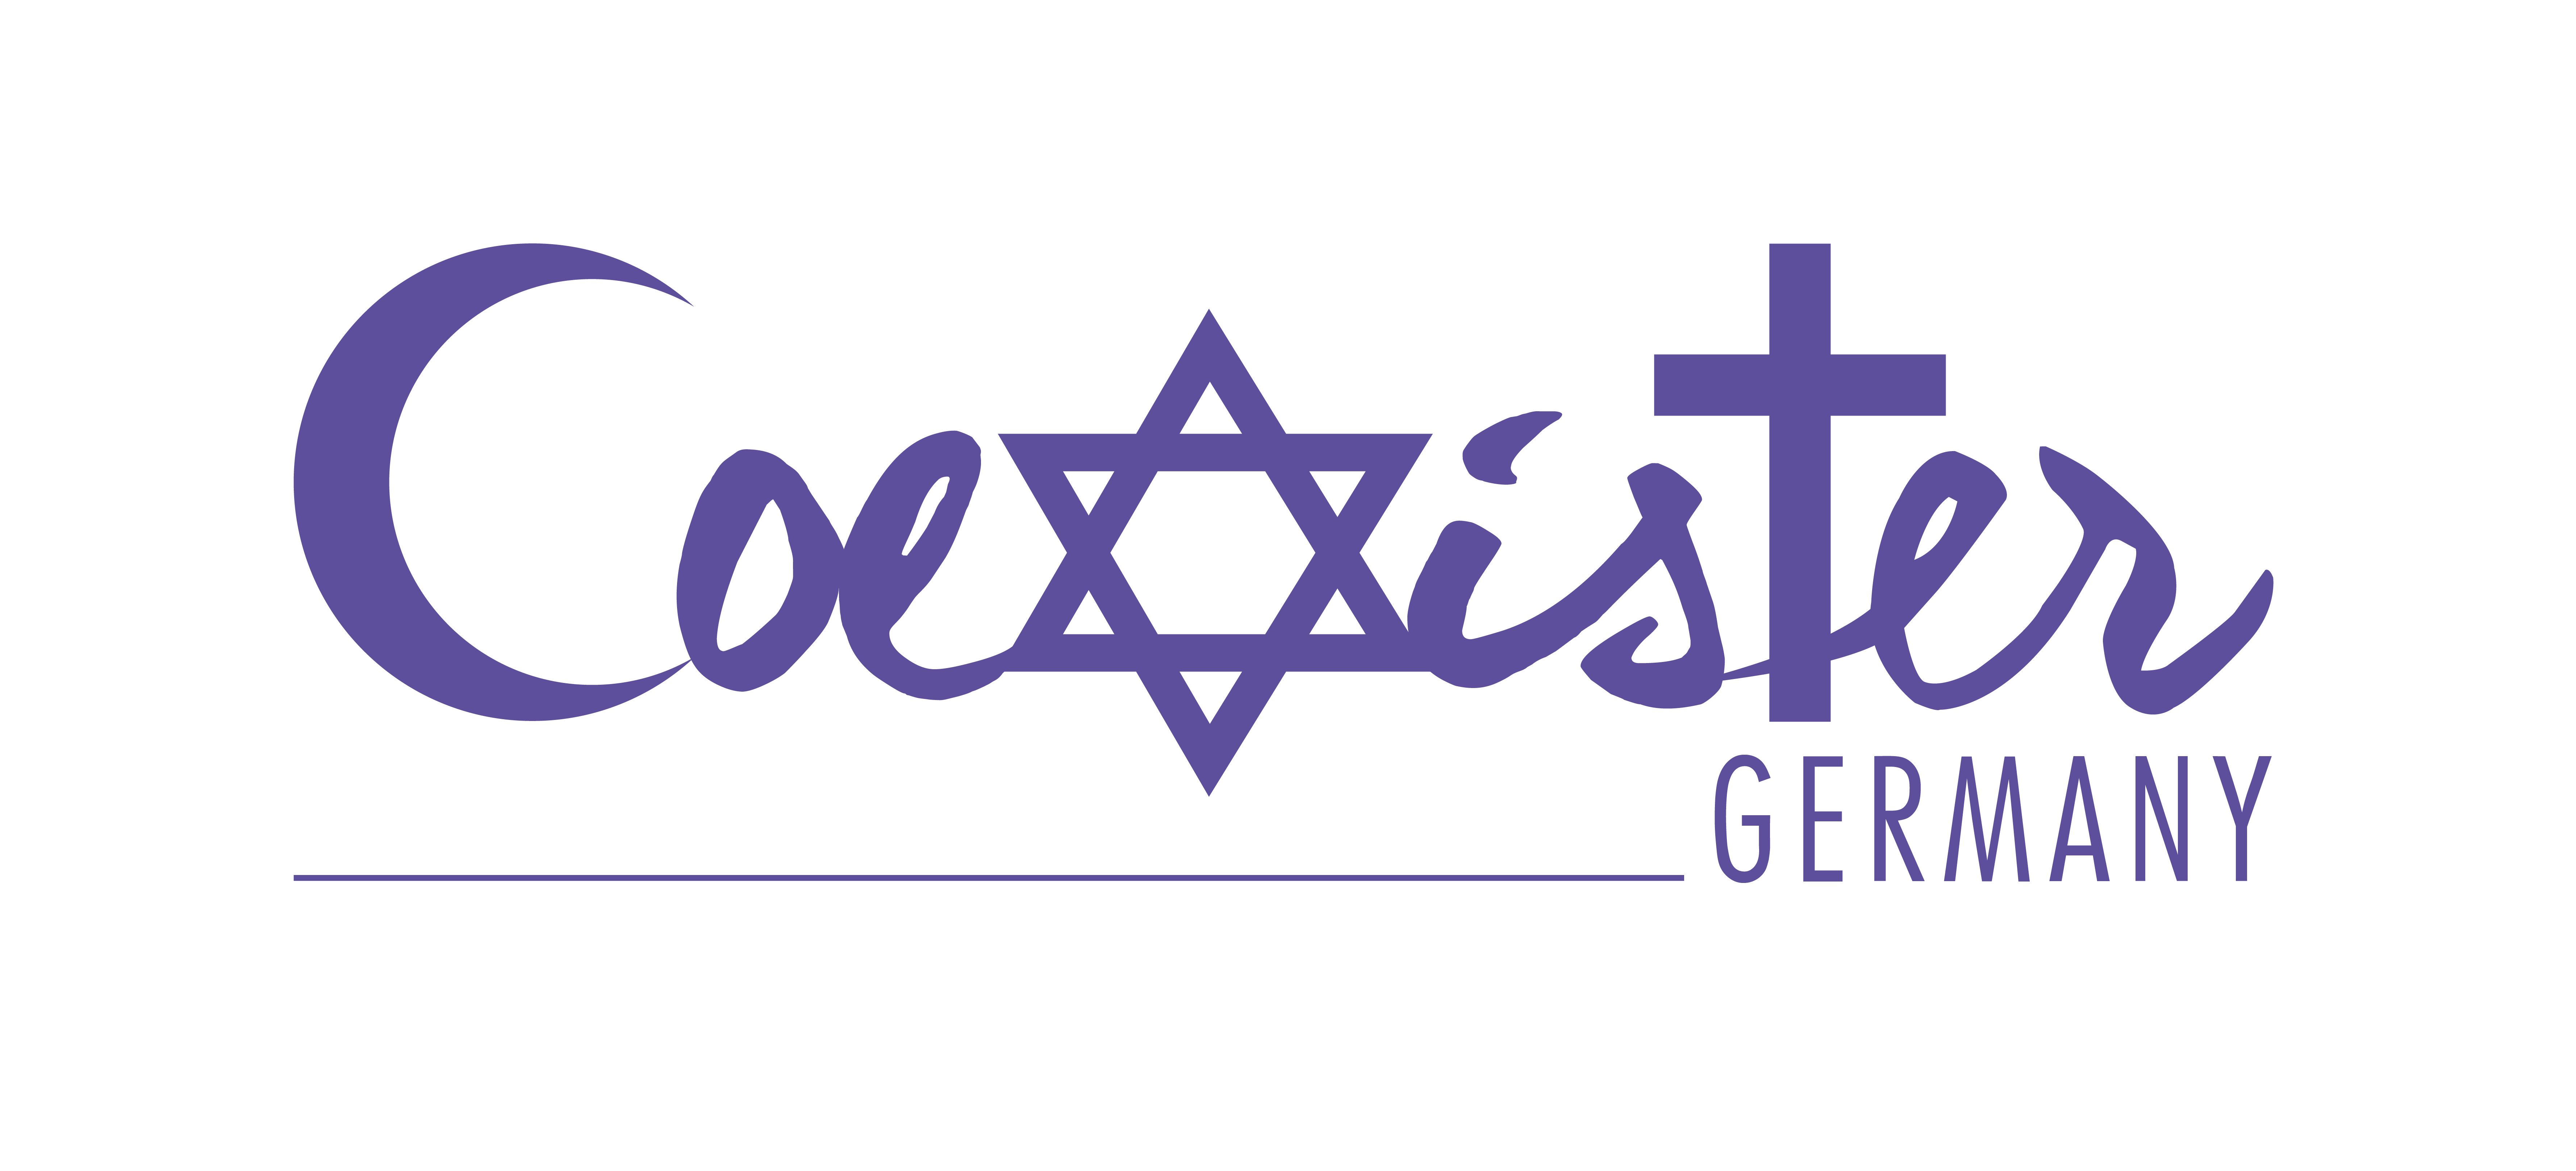 Coexister Germany